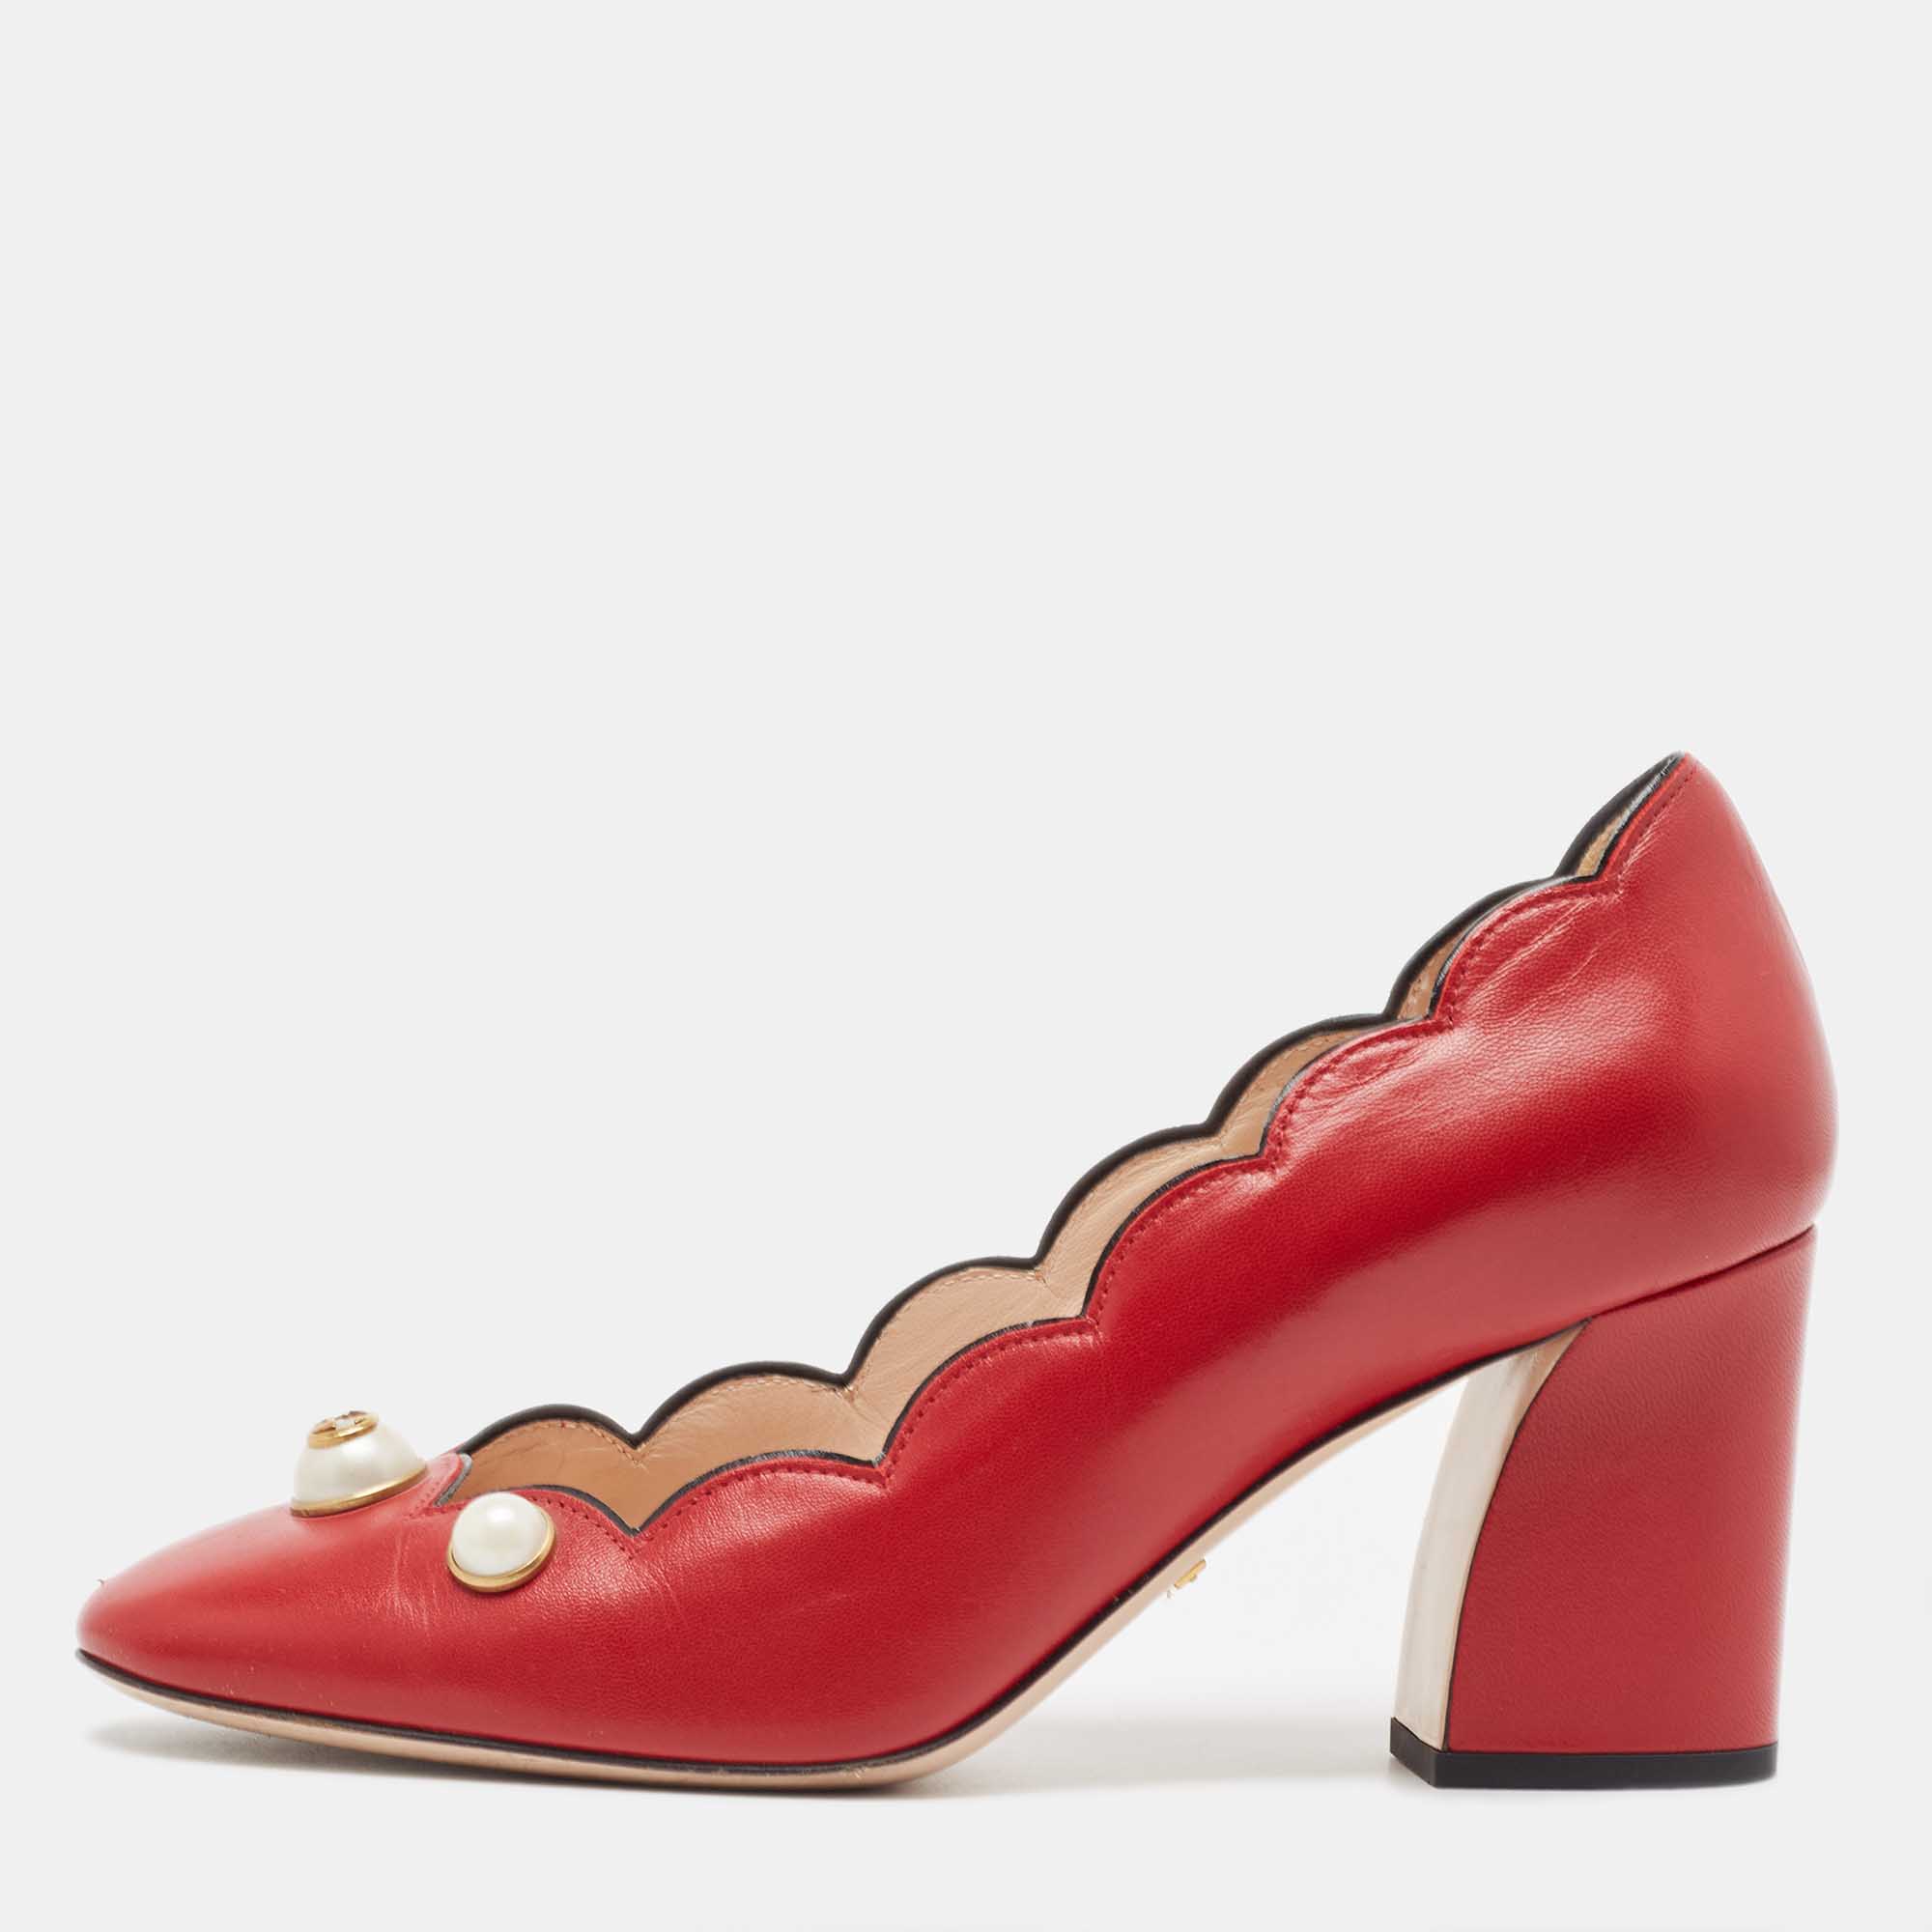 Gucci red leather willow faux pearl block heel pumps size 38